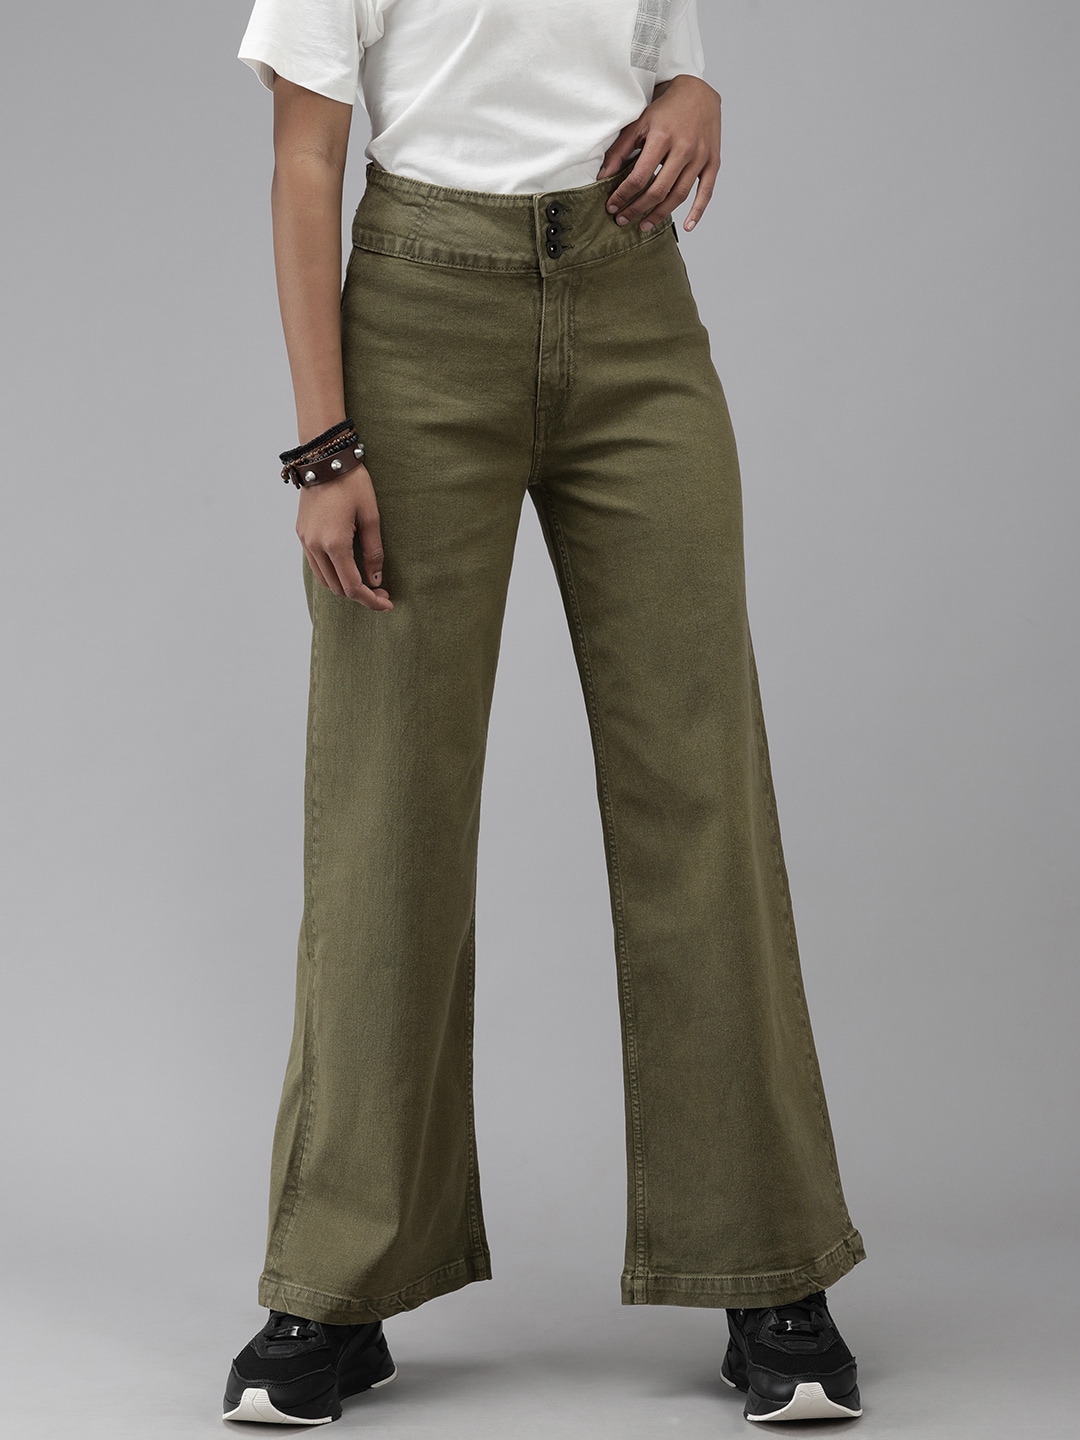 The Roadster Lifestyle Co Women Olive Green Wide Leg High-Rise Stretchable Jeans Price in India